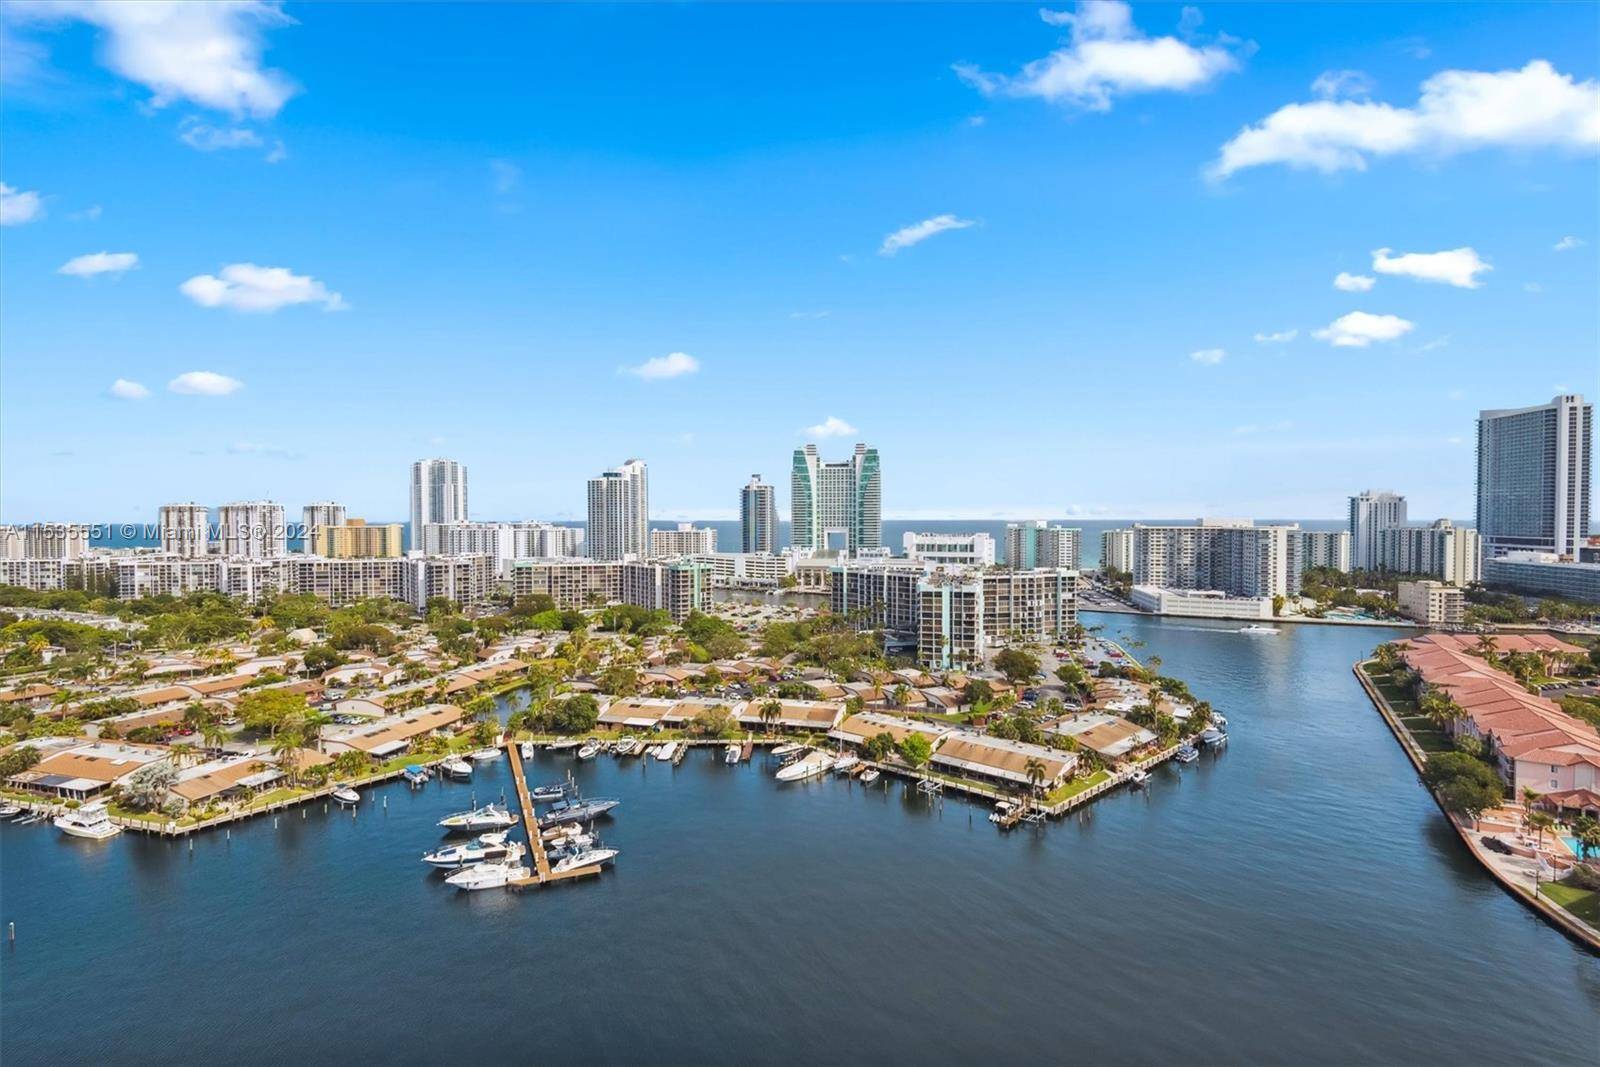 Panoramic Penthouse views can be yours in this 1984sf, 2BR, remodeled home overlooking the intracoastal waterways ocean in a luxury boutique building in Hallandale Beach, one of only a few ...